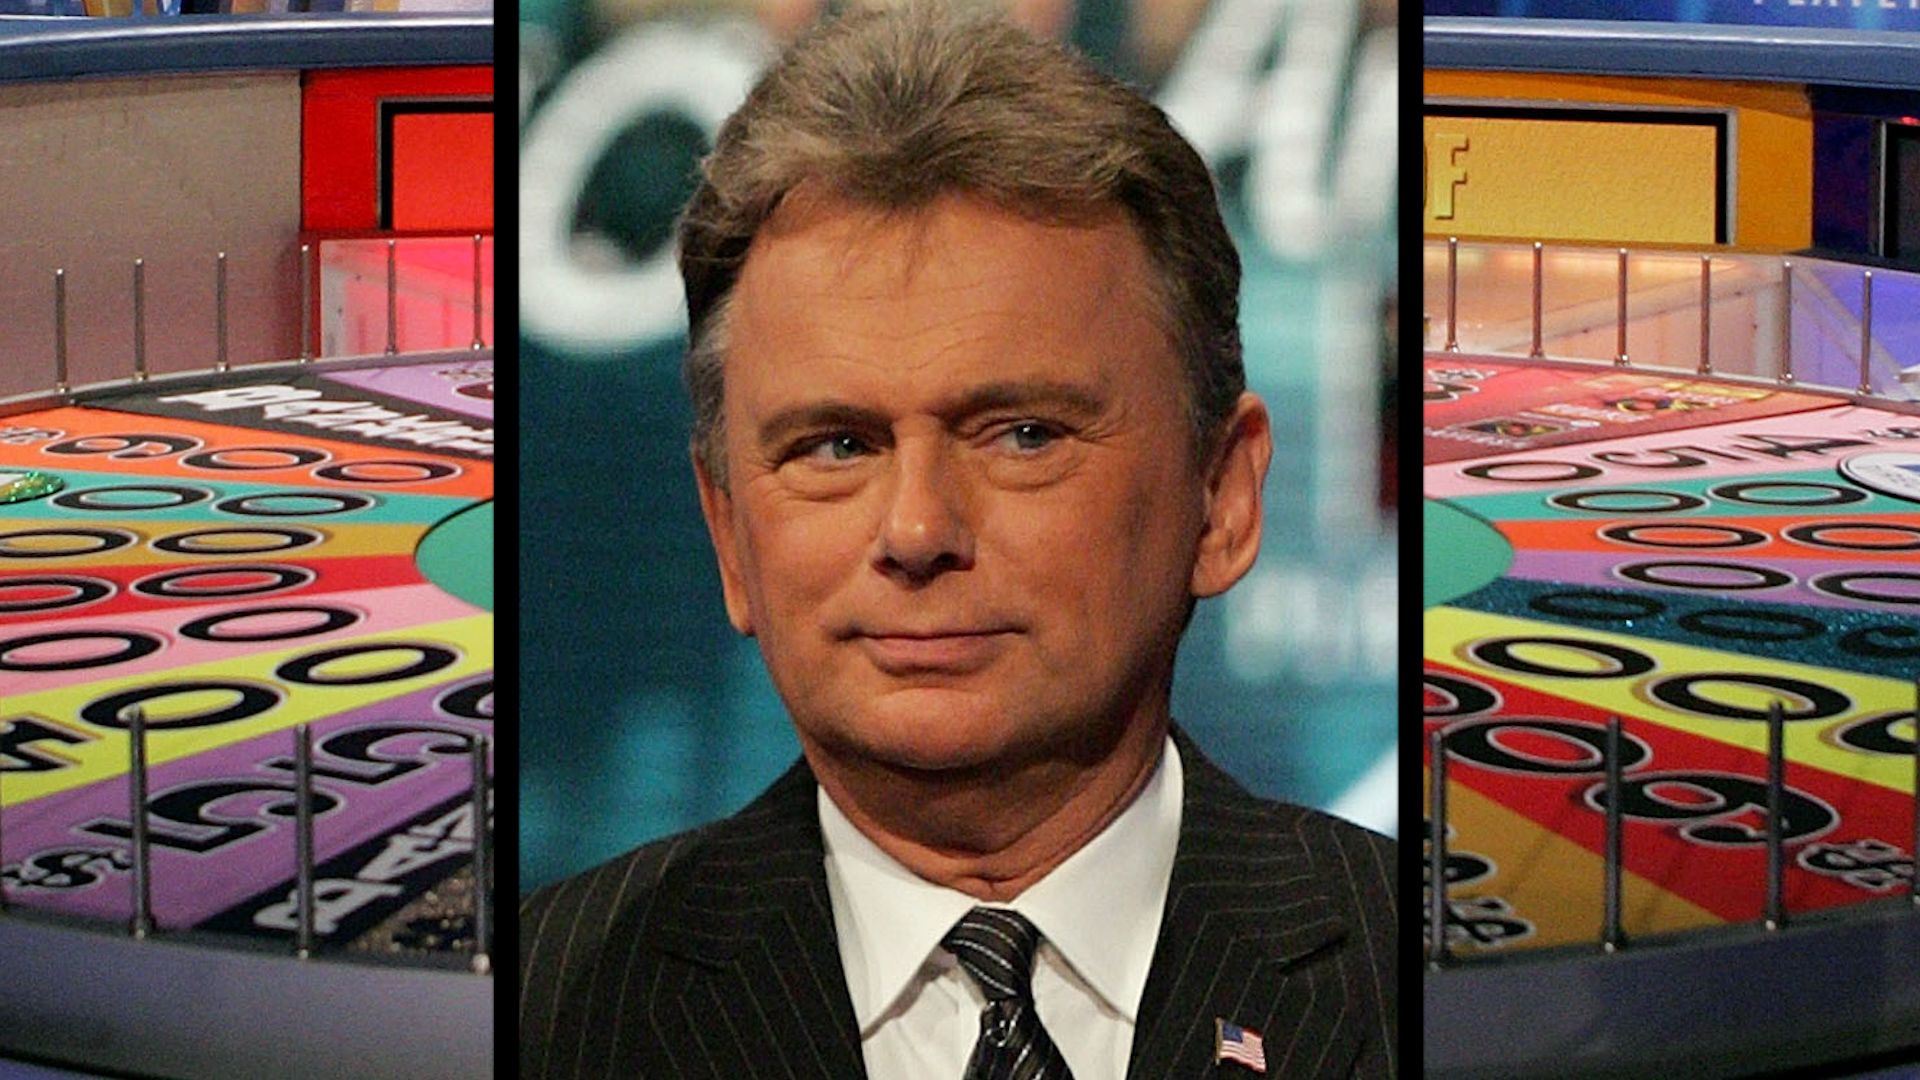 Pat Sajak, Longtime 'Wheel of Fortune' Host, Says He Will Retire